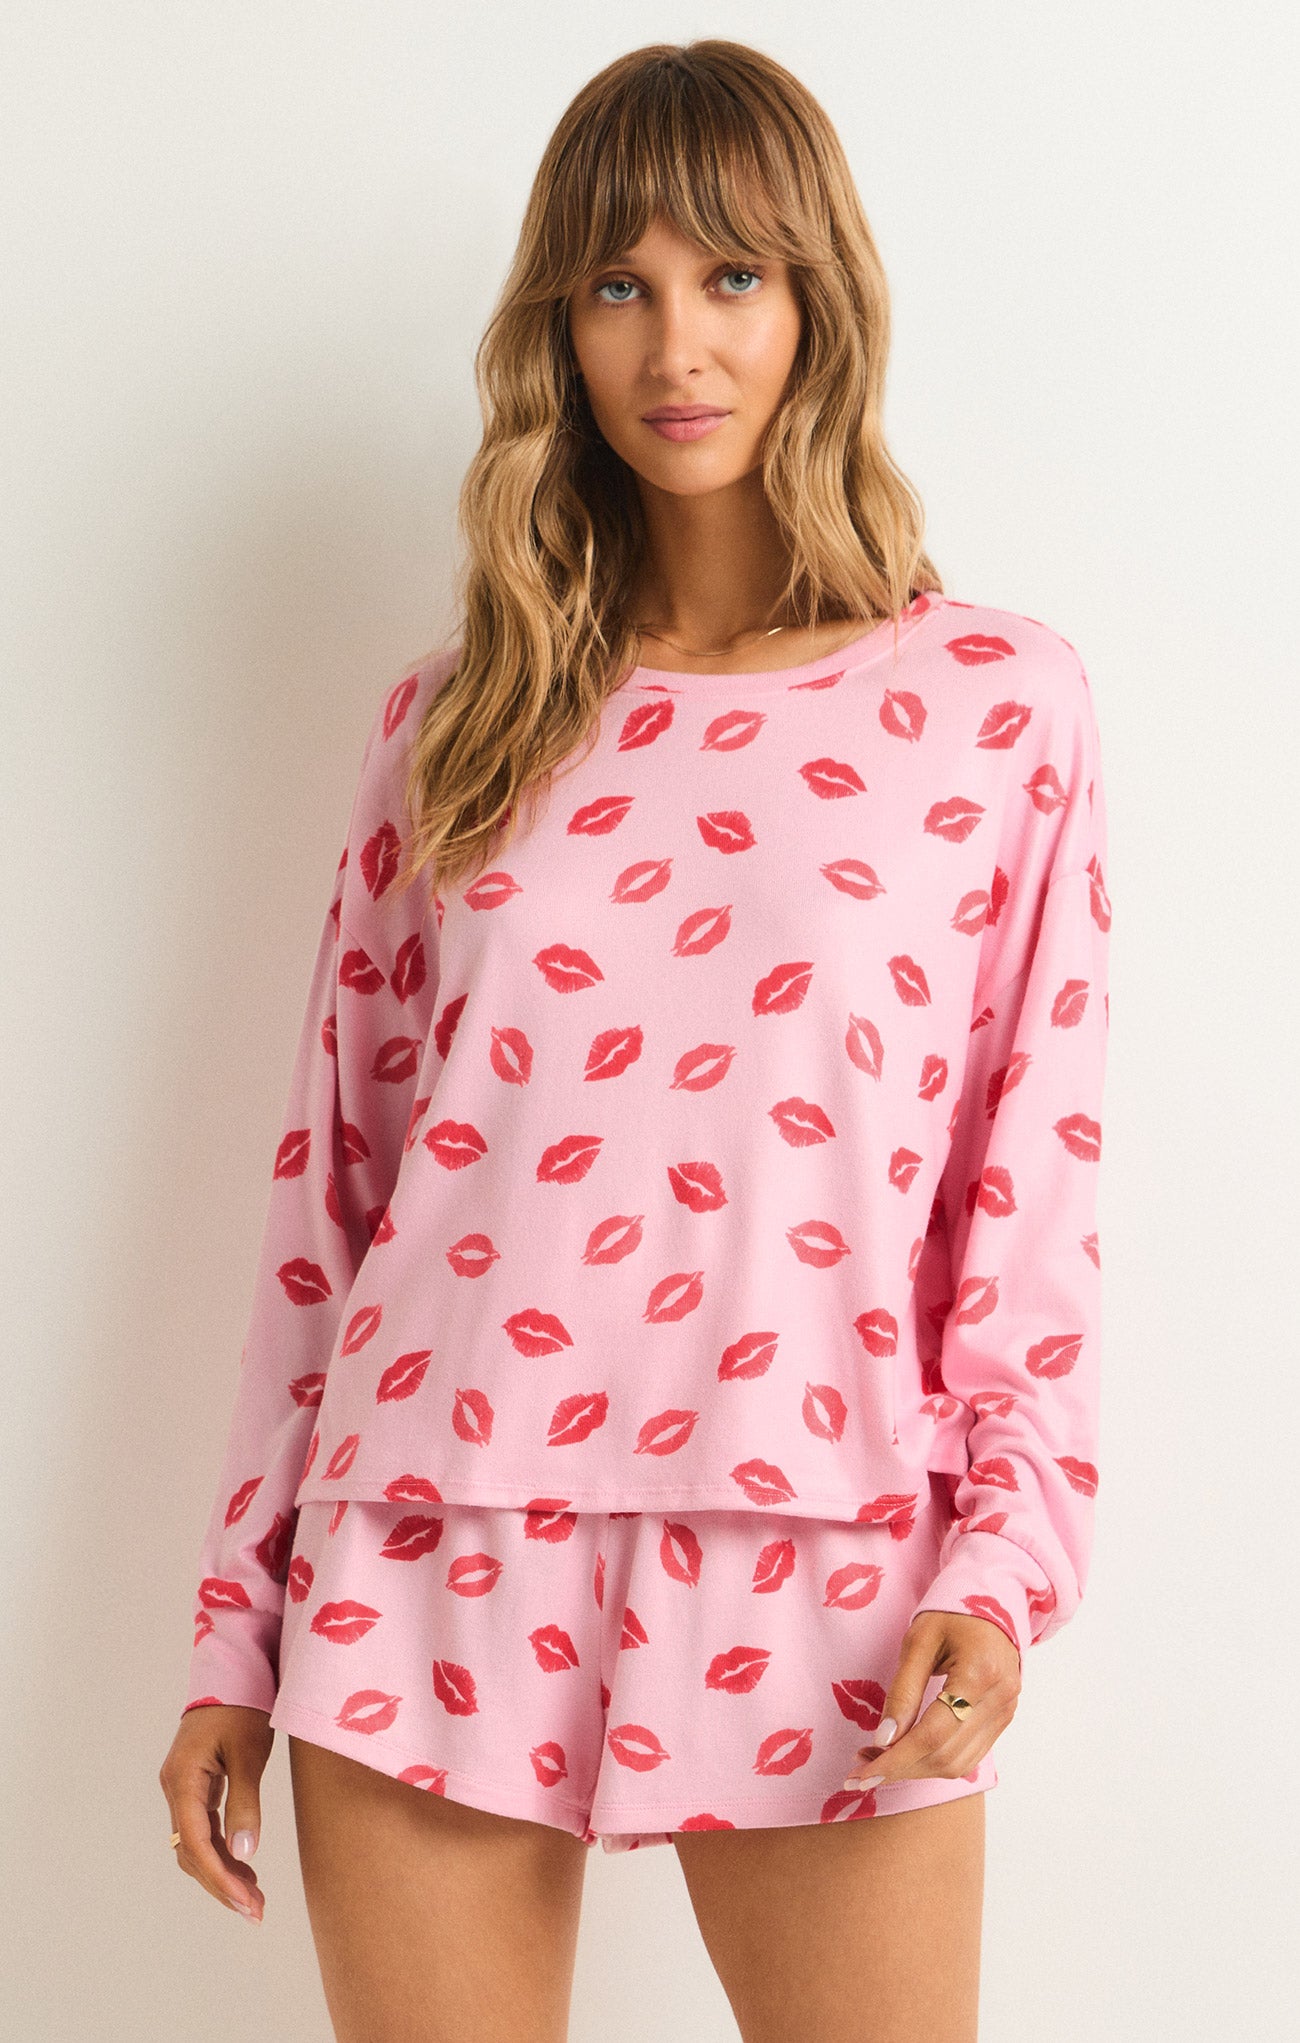 Z Supply Pucker Up Kisses Long Sleeve Top